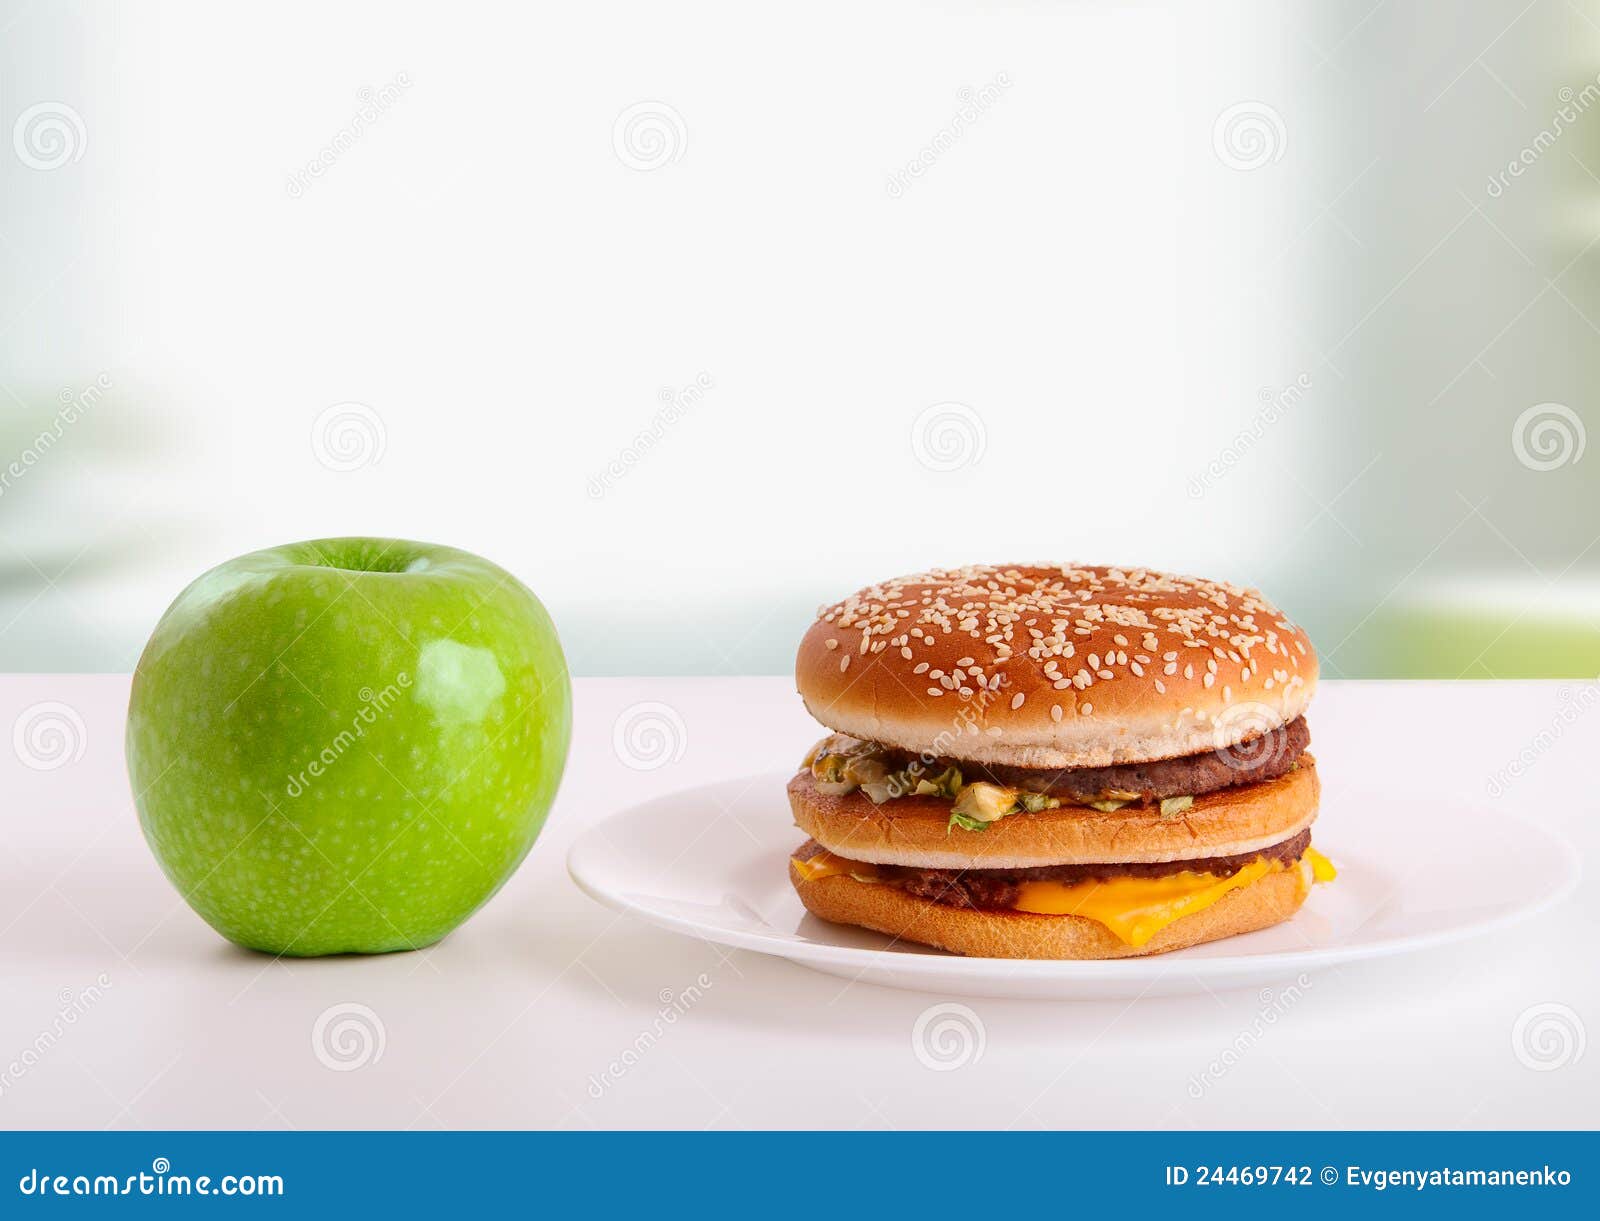 Choice of healthy and unhealthy food. Diet concept: green apple and ...